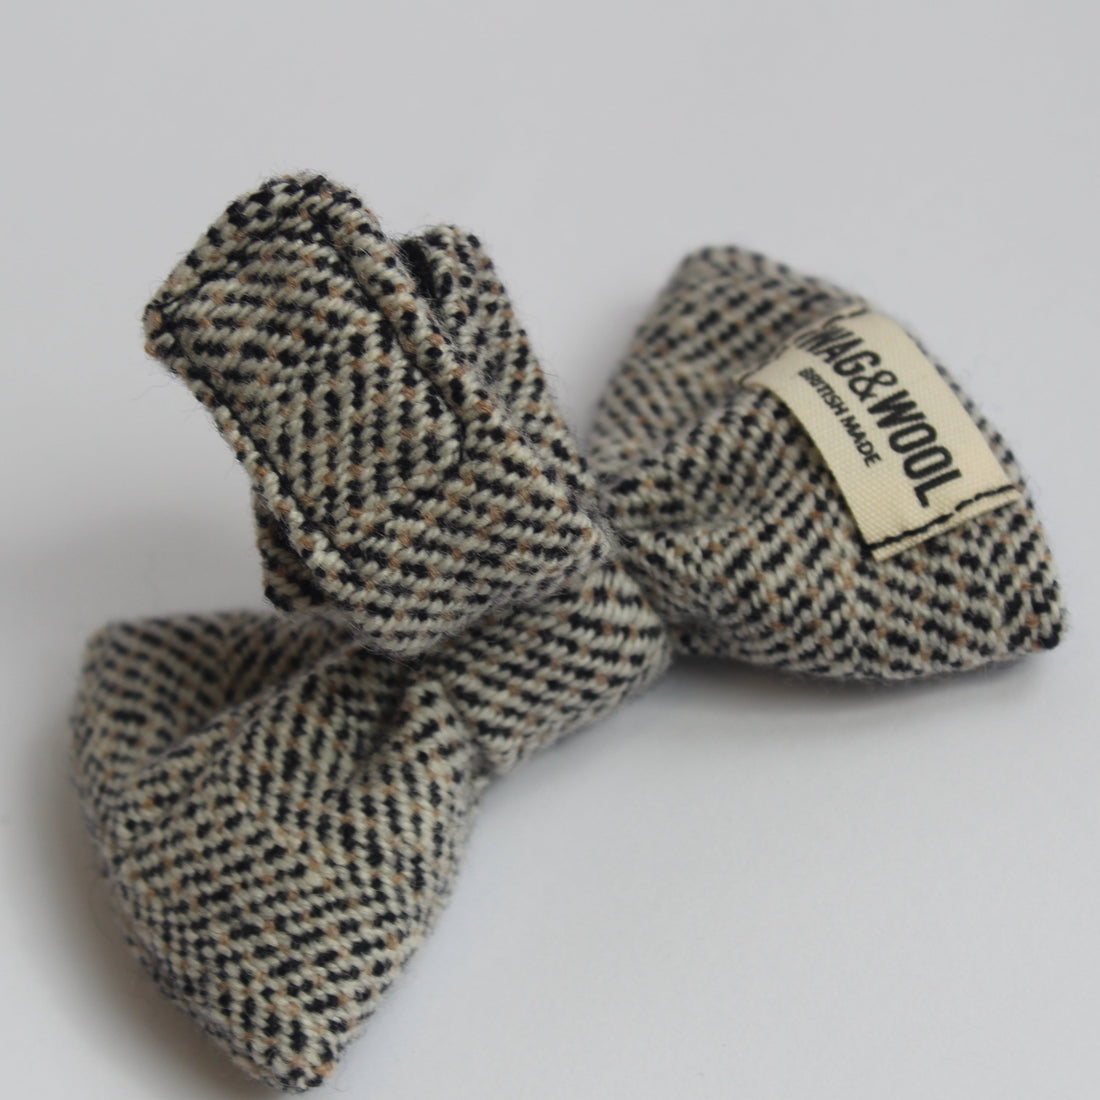 Dog and Dad Matching Gift | Hand-Woven Bow Tie Set